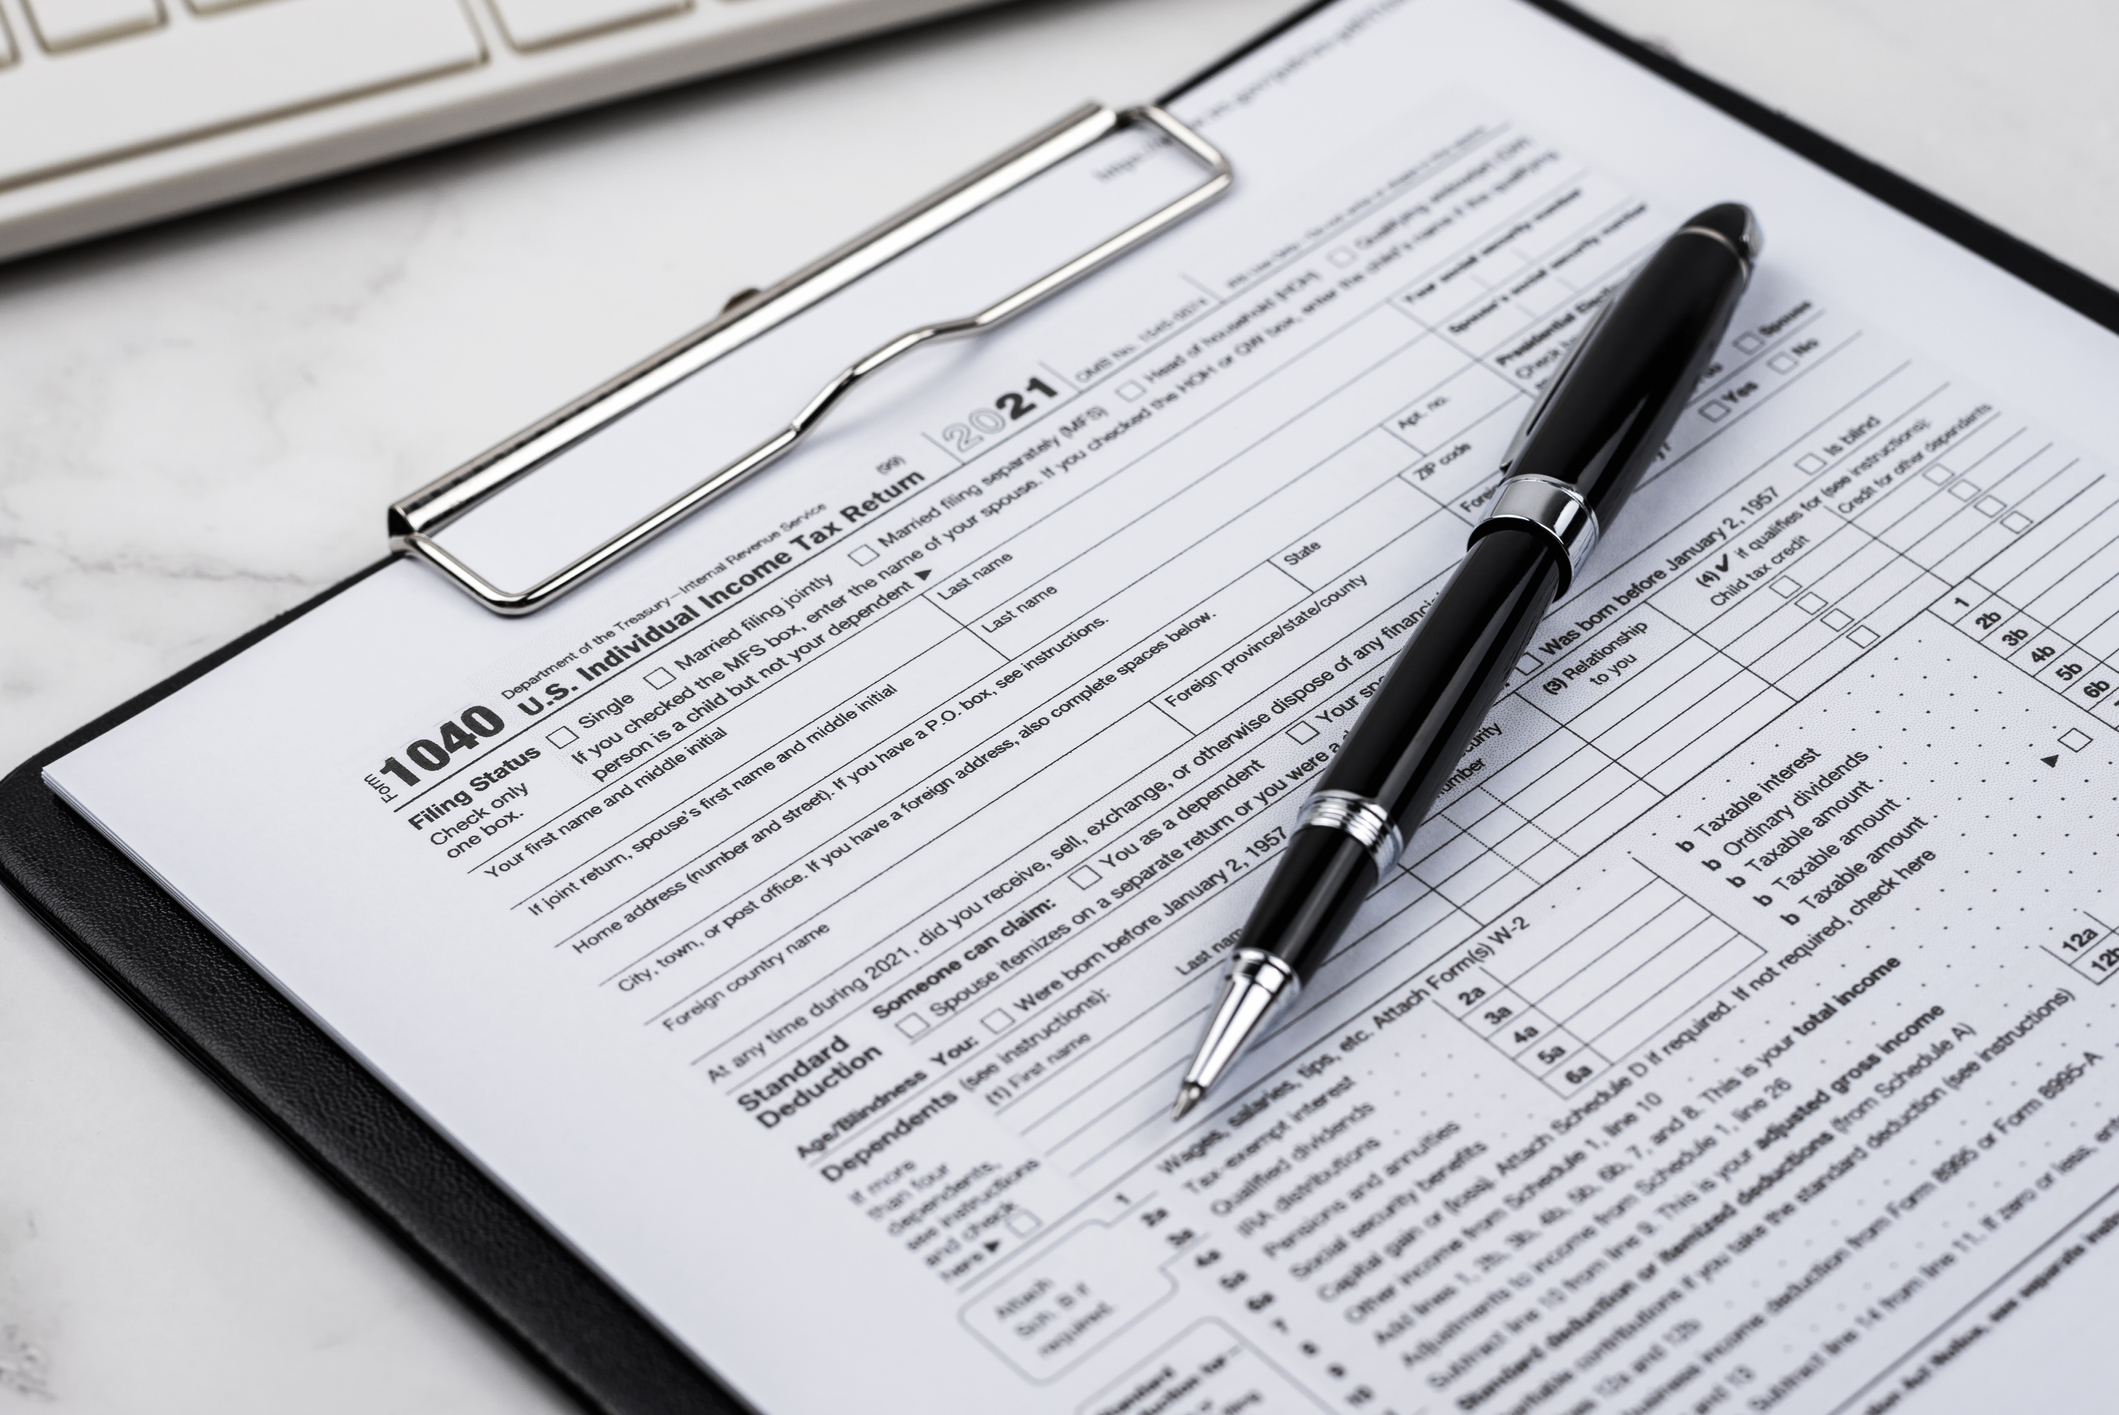 A photo shows a close-up of a Form 1040 tax form.